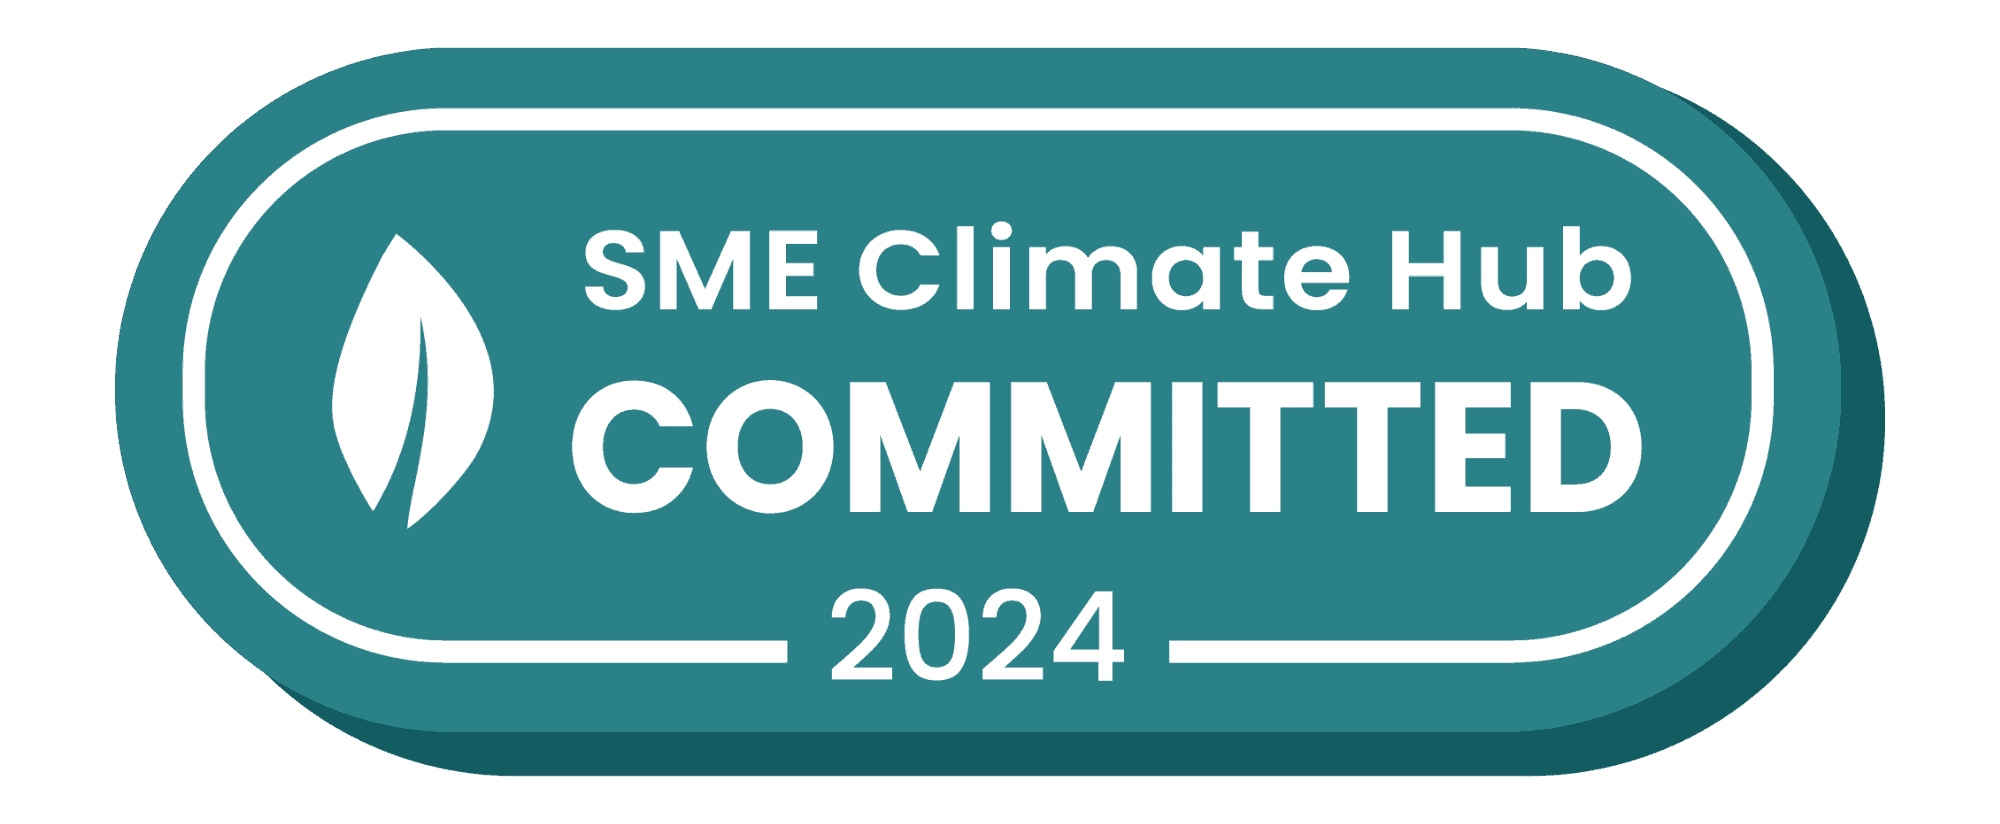 SME Climate HUB Committed 2024